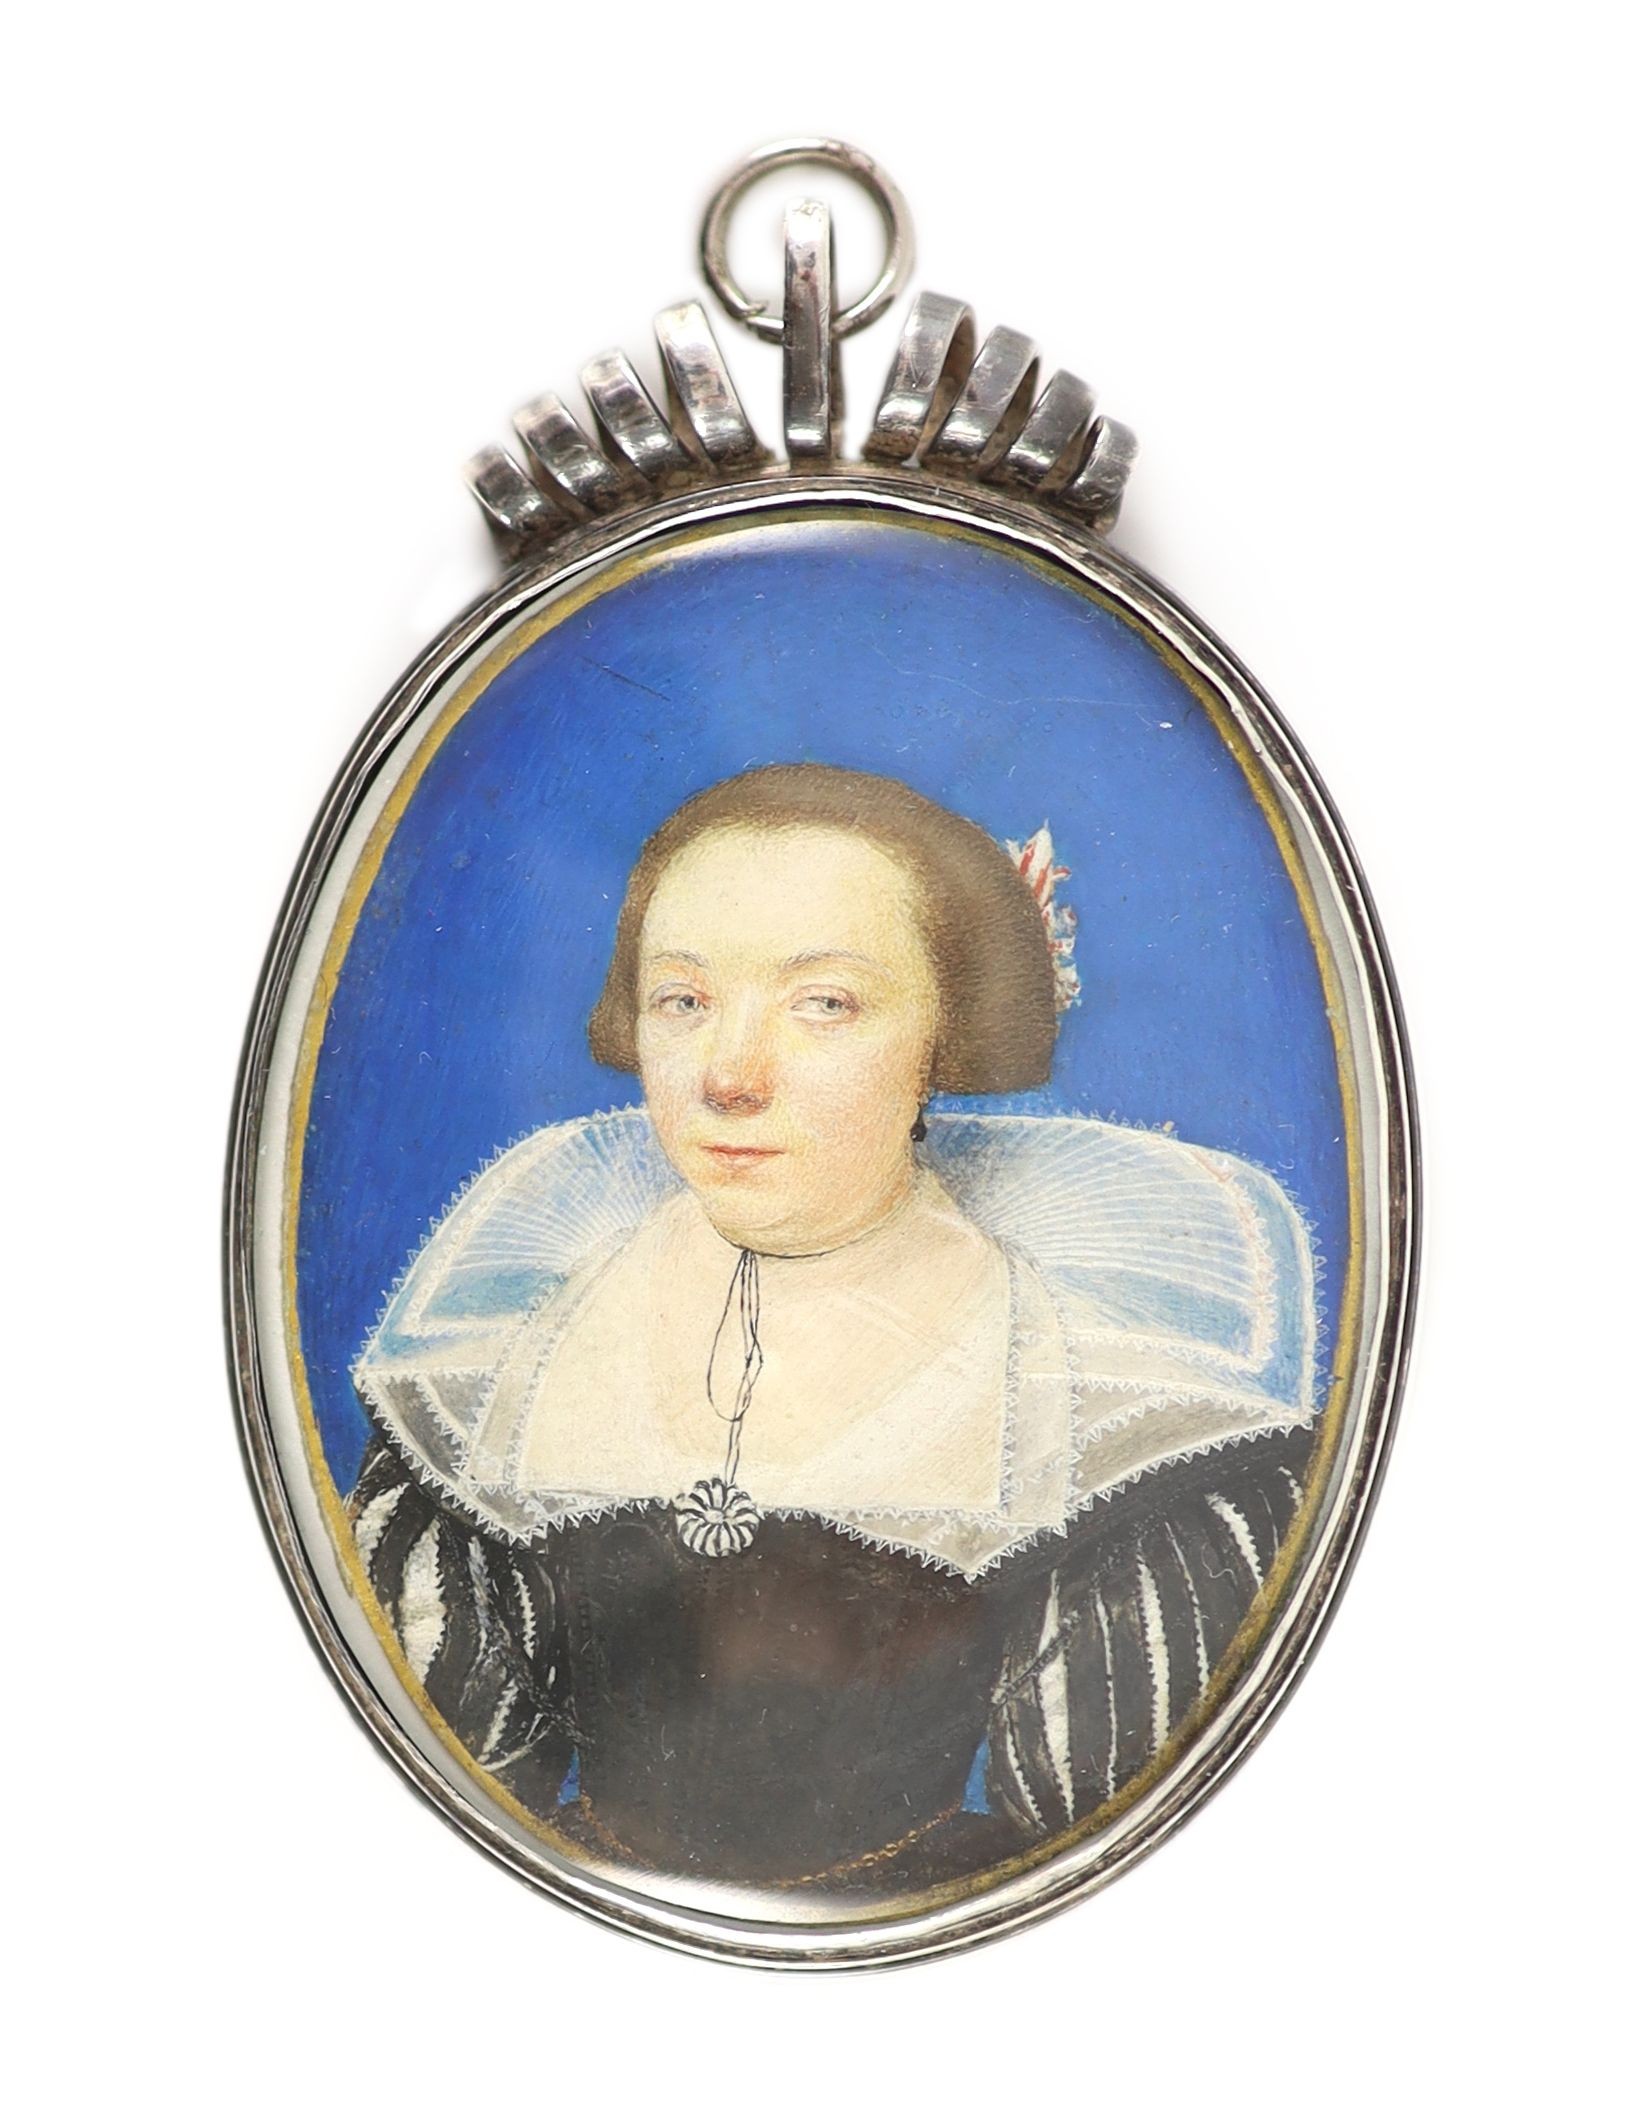 17th century English School Portrait miniature of a lady wearing a black dress with lace collar